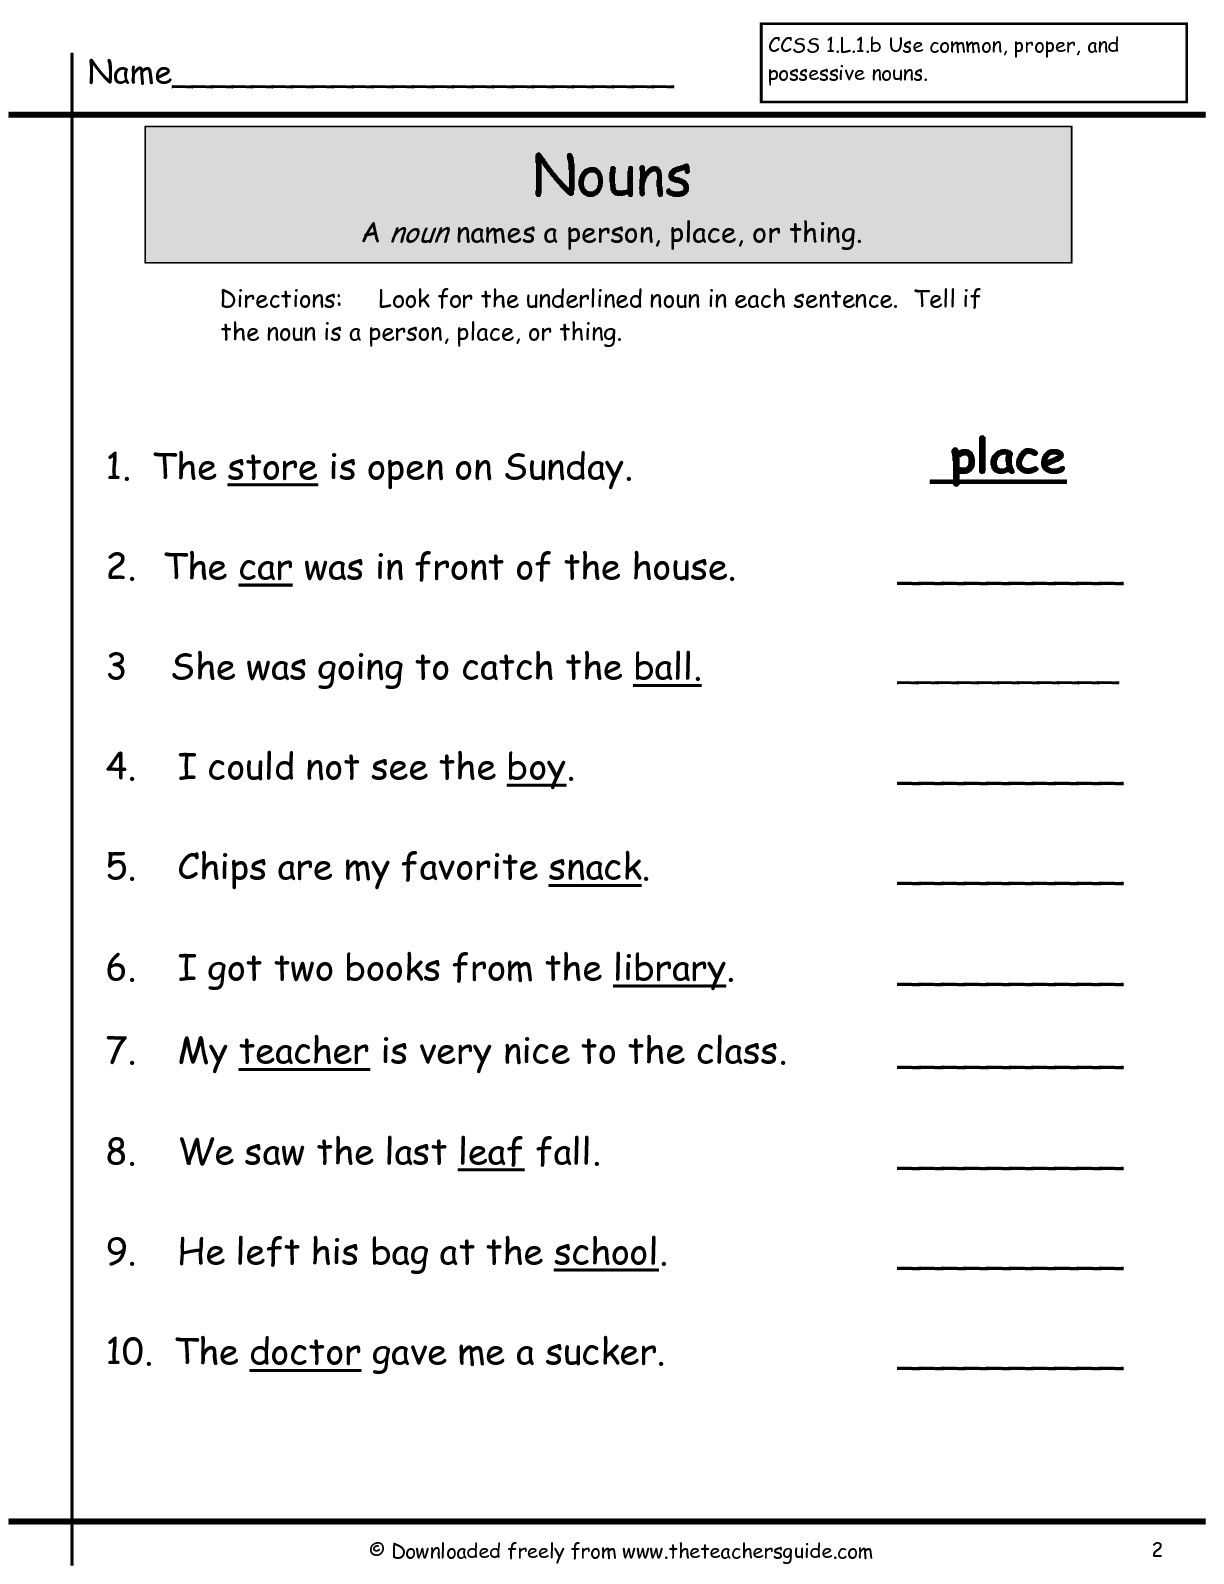 Subject Verb Agreement Practice Worksheets together with Nouns Grade 1 Worksheets Google Search Kelina